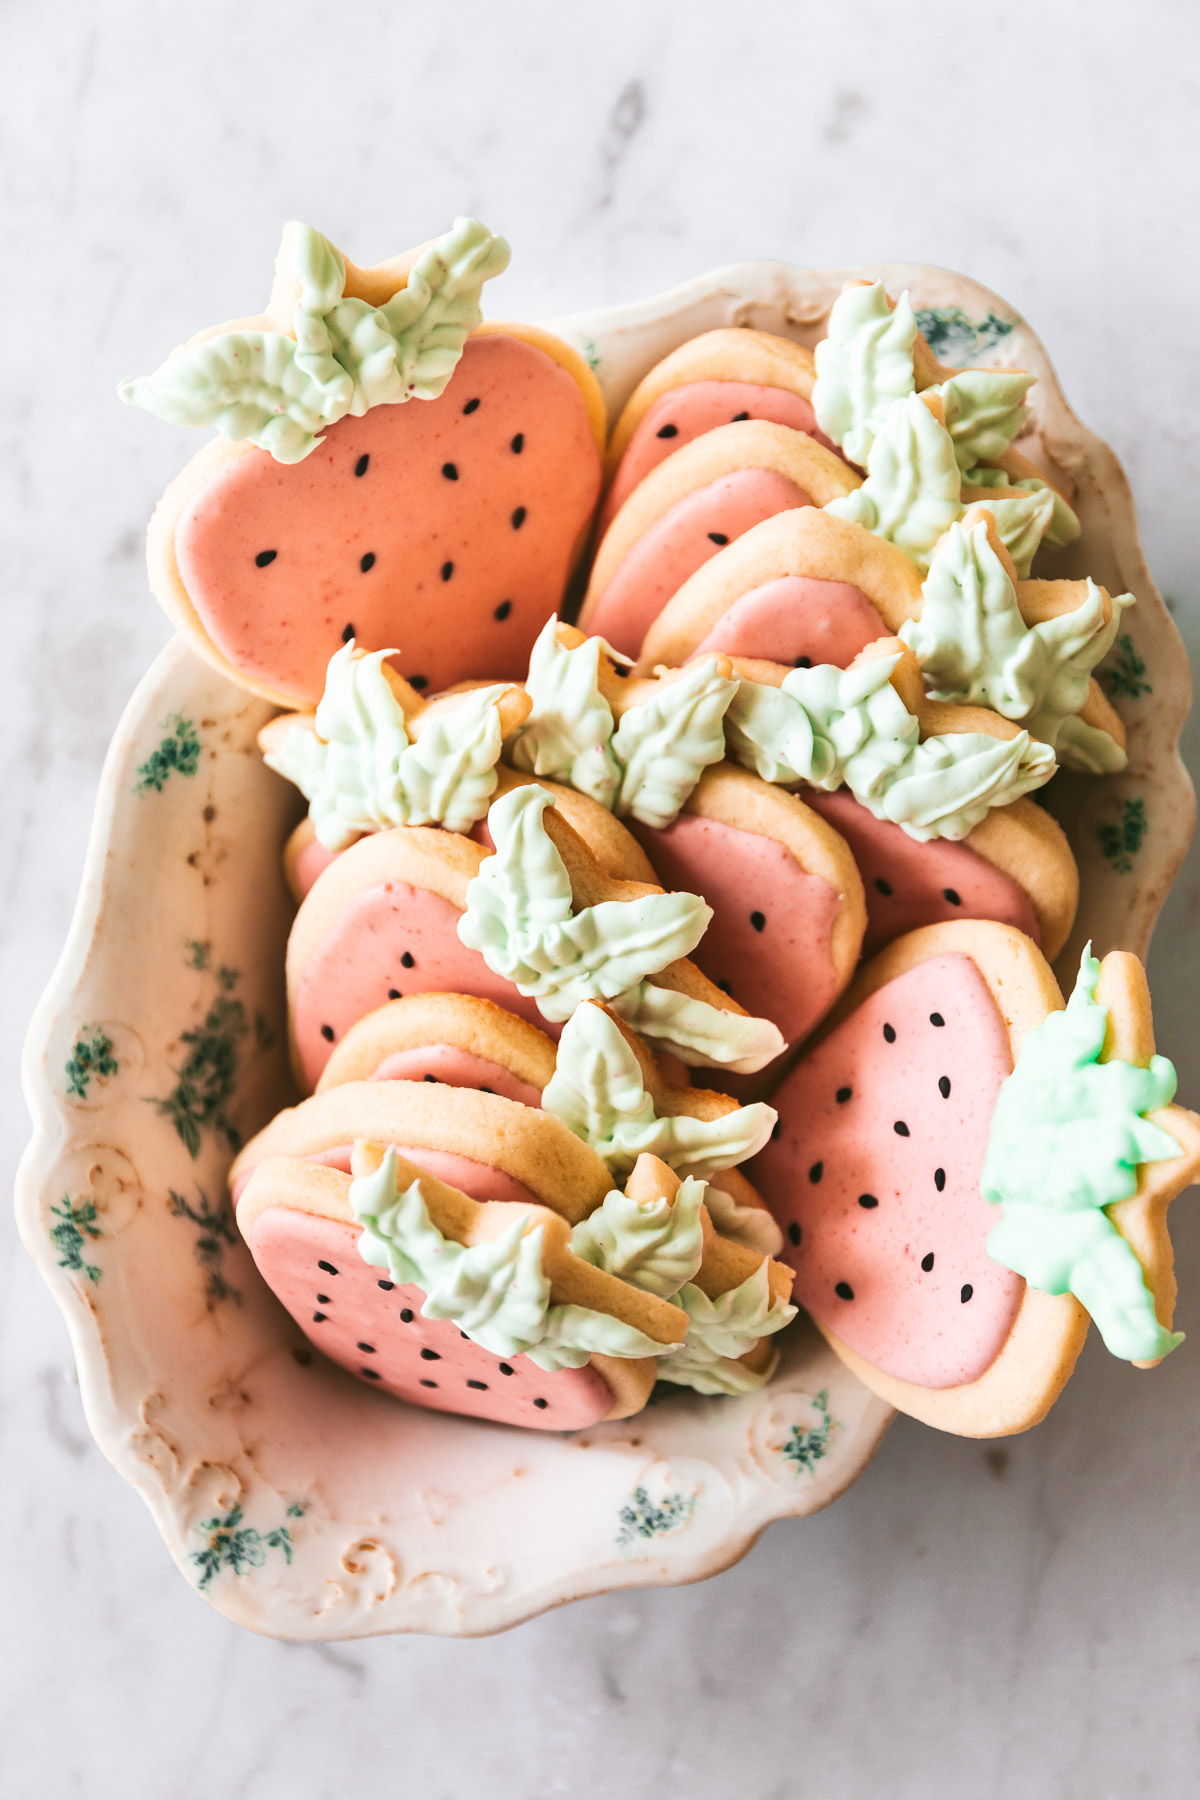 Overhead picture of strawberry shaped cookies with pink icing, black sesame seed decorations and green frosting leaves in a vintage bowl